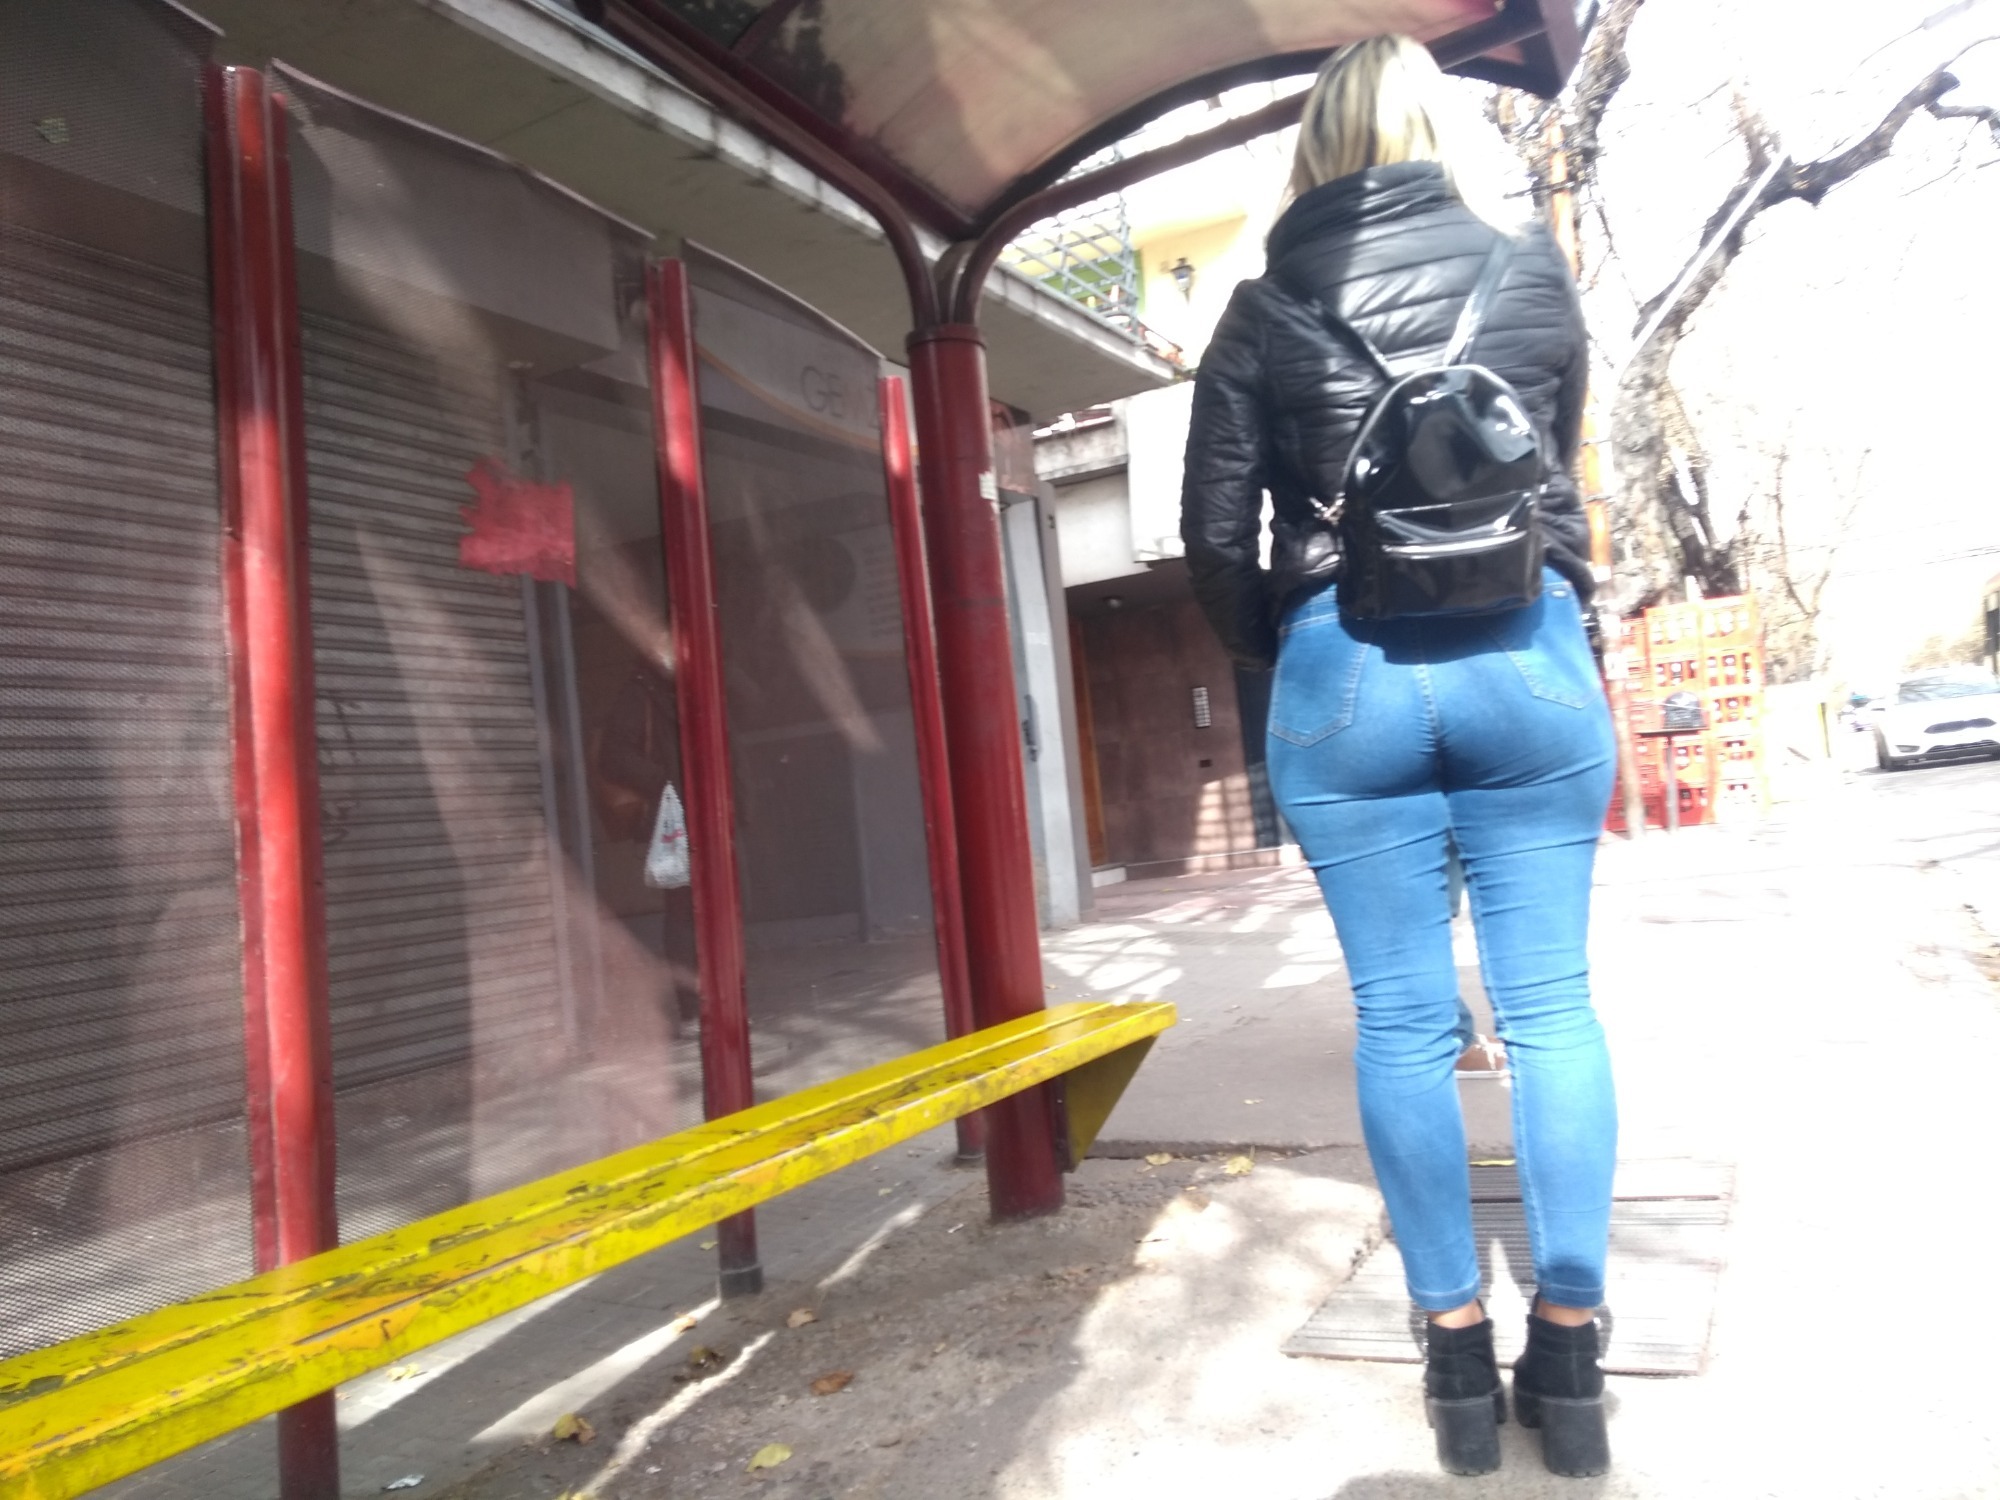 Bus station ass - Tight Jeans